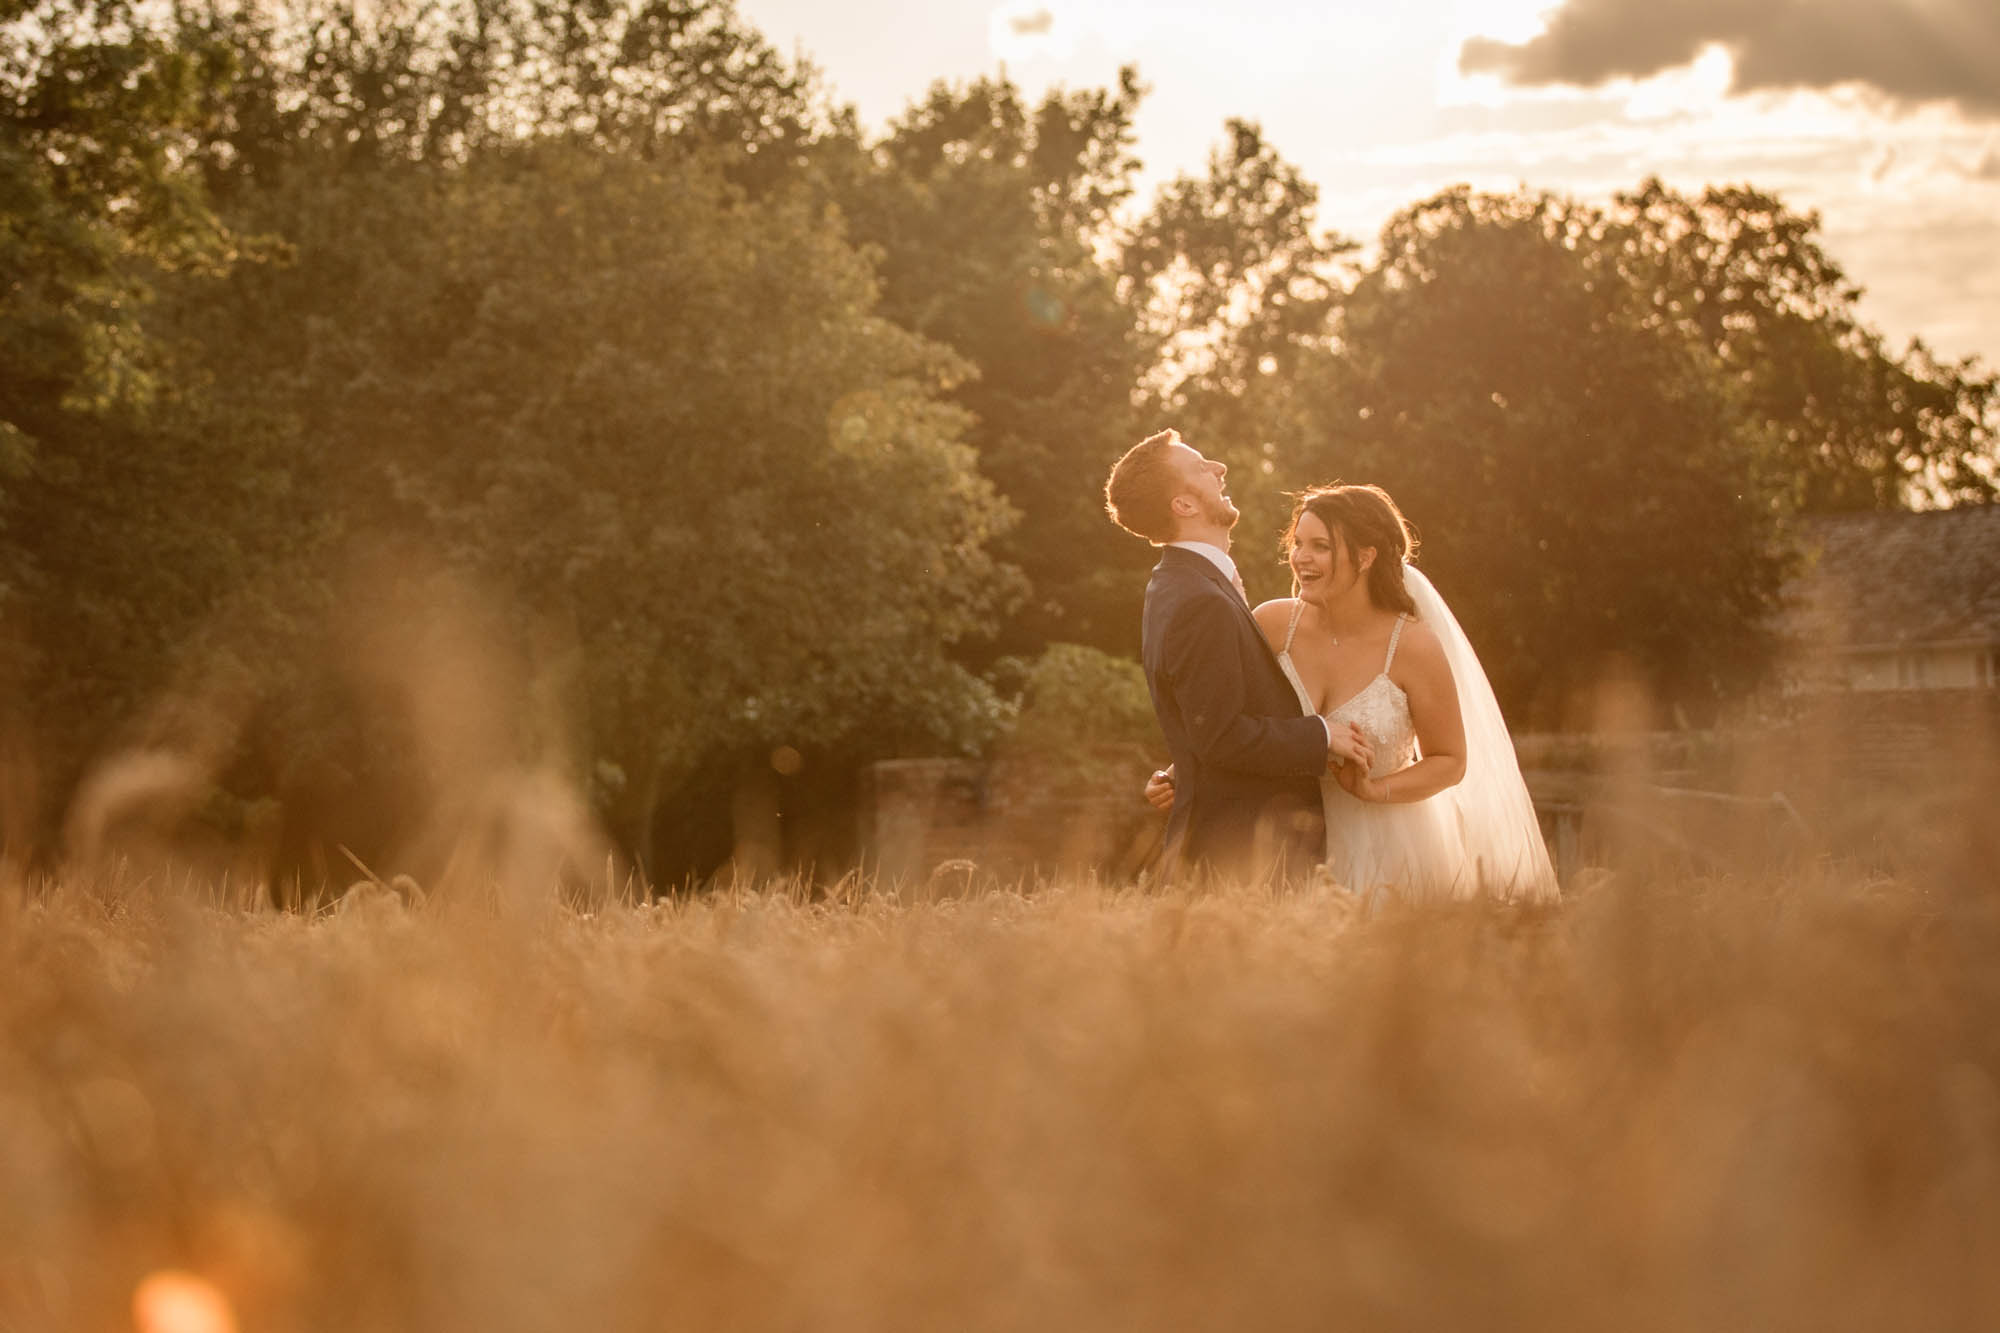 Golden hour wedding photography by Becky Harley in Hertfordshire. Couples bathed in golden light in beautiful surroundings on their wedding days.